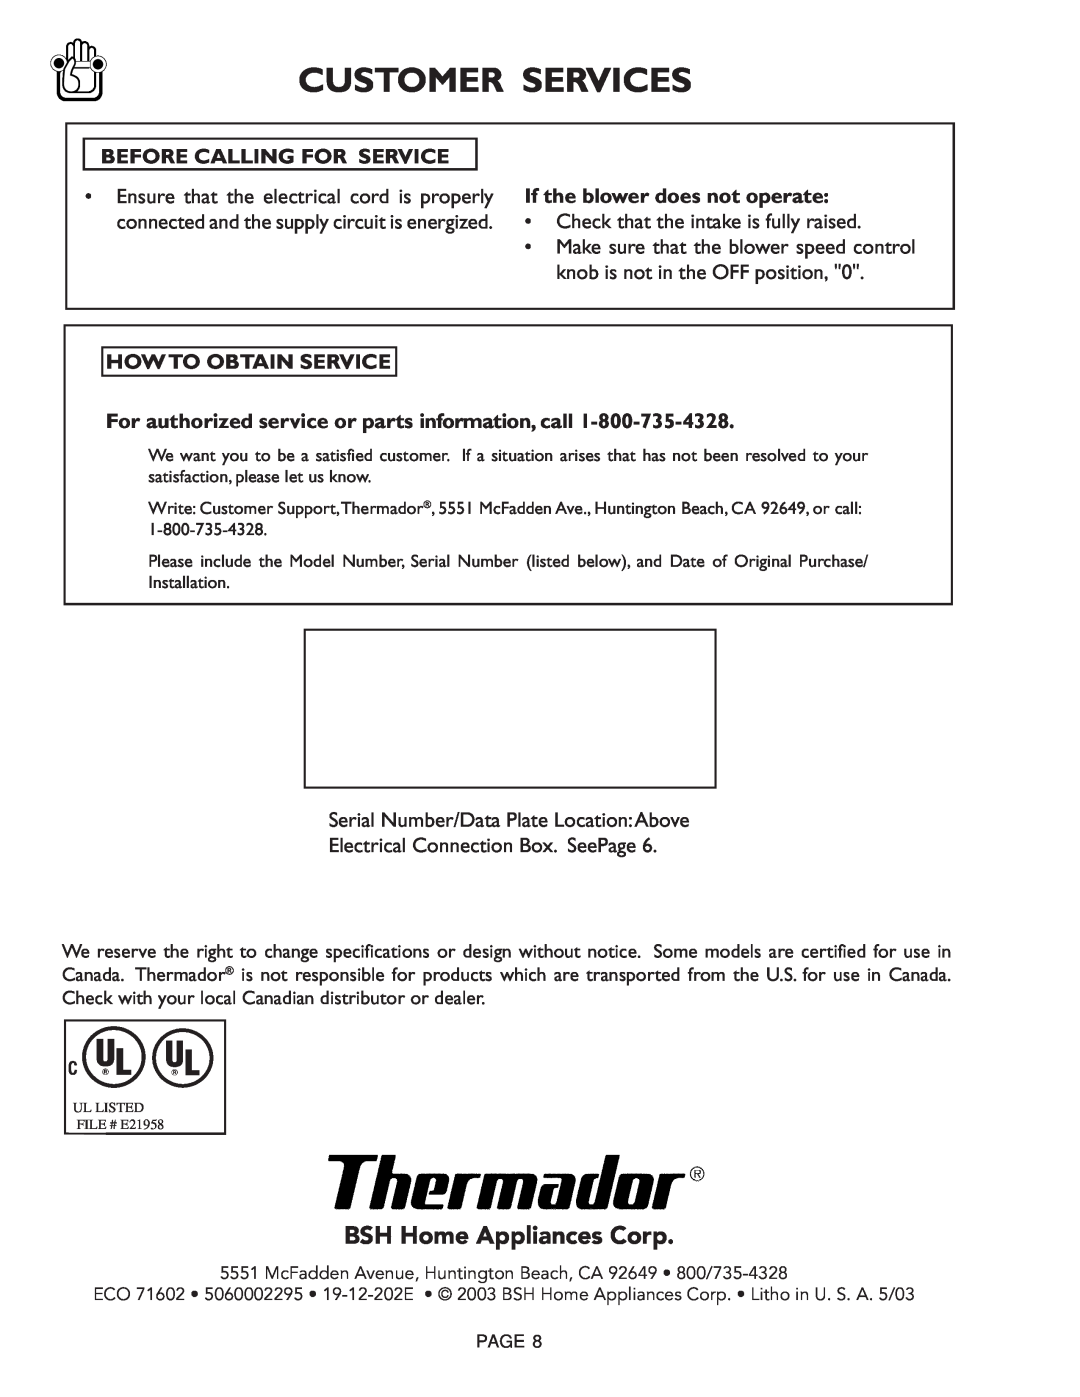 Thermador CVS30R Before Calling For Service, If the blower does not operate, How To Obtain Service, Customer Services 